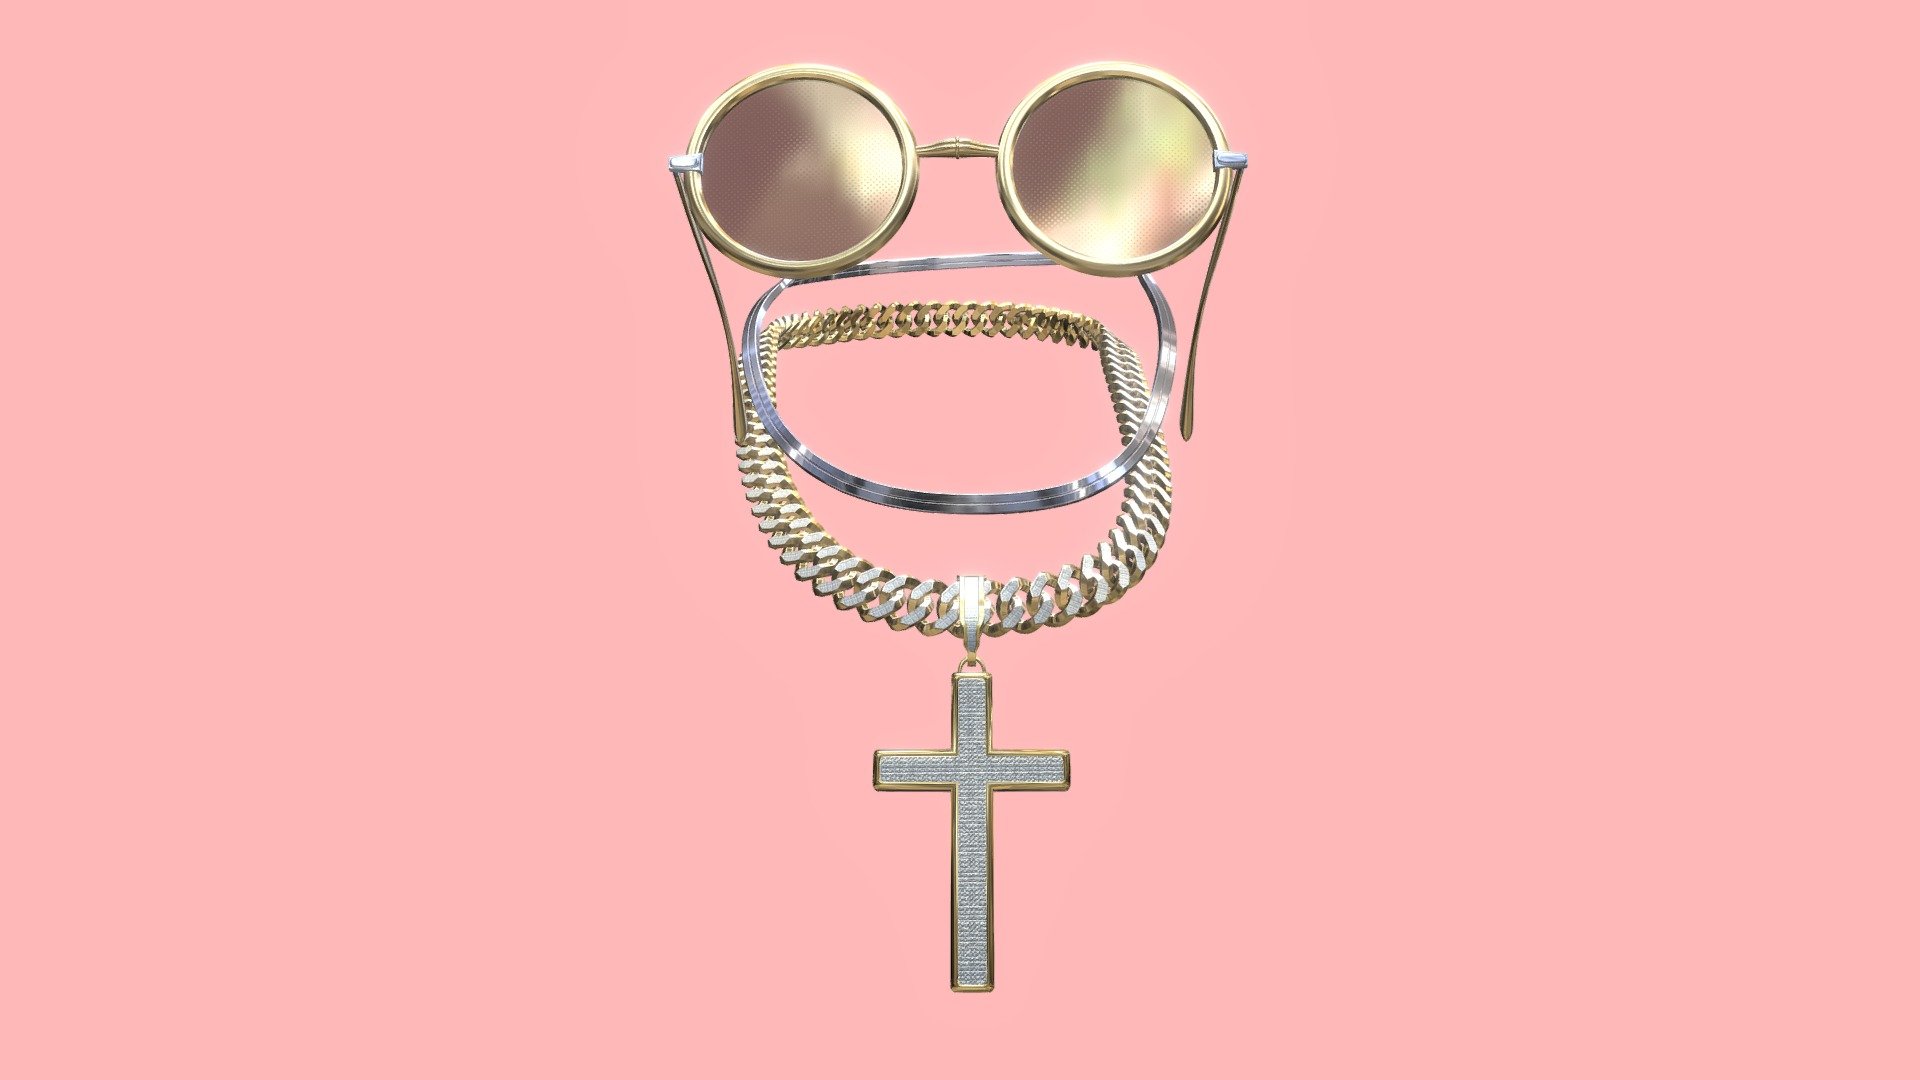 77 Links - Diamond Cuban Gold Chain + Cross Pendant.
Platinum Chain

Gold Glasses



2K PBR Materials.
cross pendant &amp; chain have seperate UV Maps.
Platinum Chain has no materials.
Glasses have Seperate Map from the chain &amp; Pendant.



Necklaces Modeled to fit &ldquo;Character Creator 3 Default Female Character